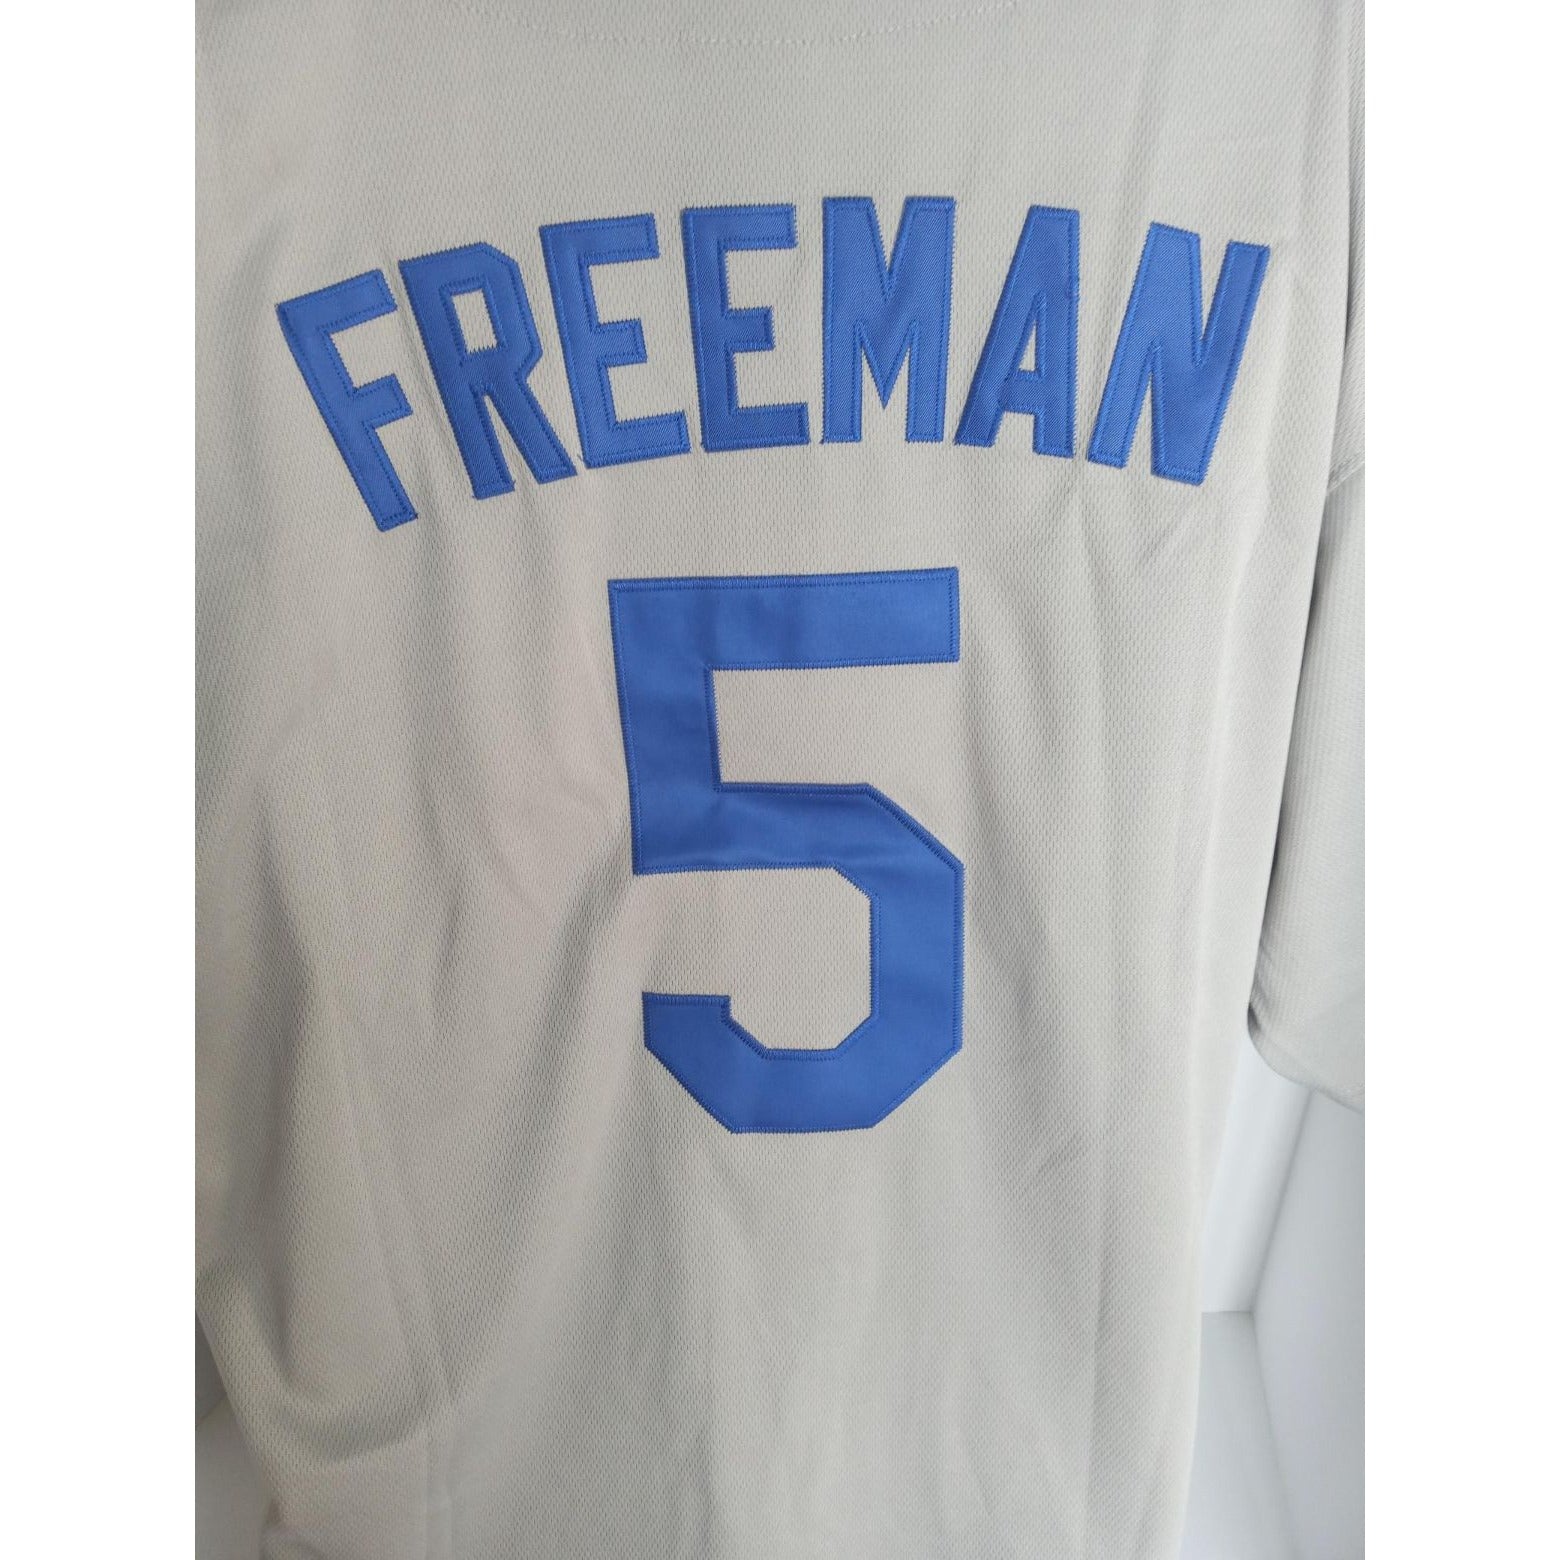 Awesome Artifacts Freddie Freeman Los Angeles Dodgers Game Model Jersey Signed with Proof by Awesome Artifact